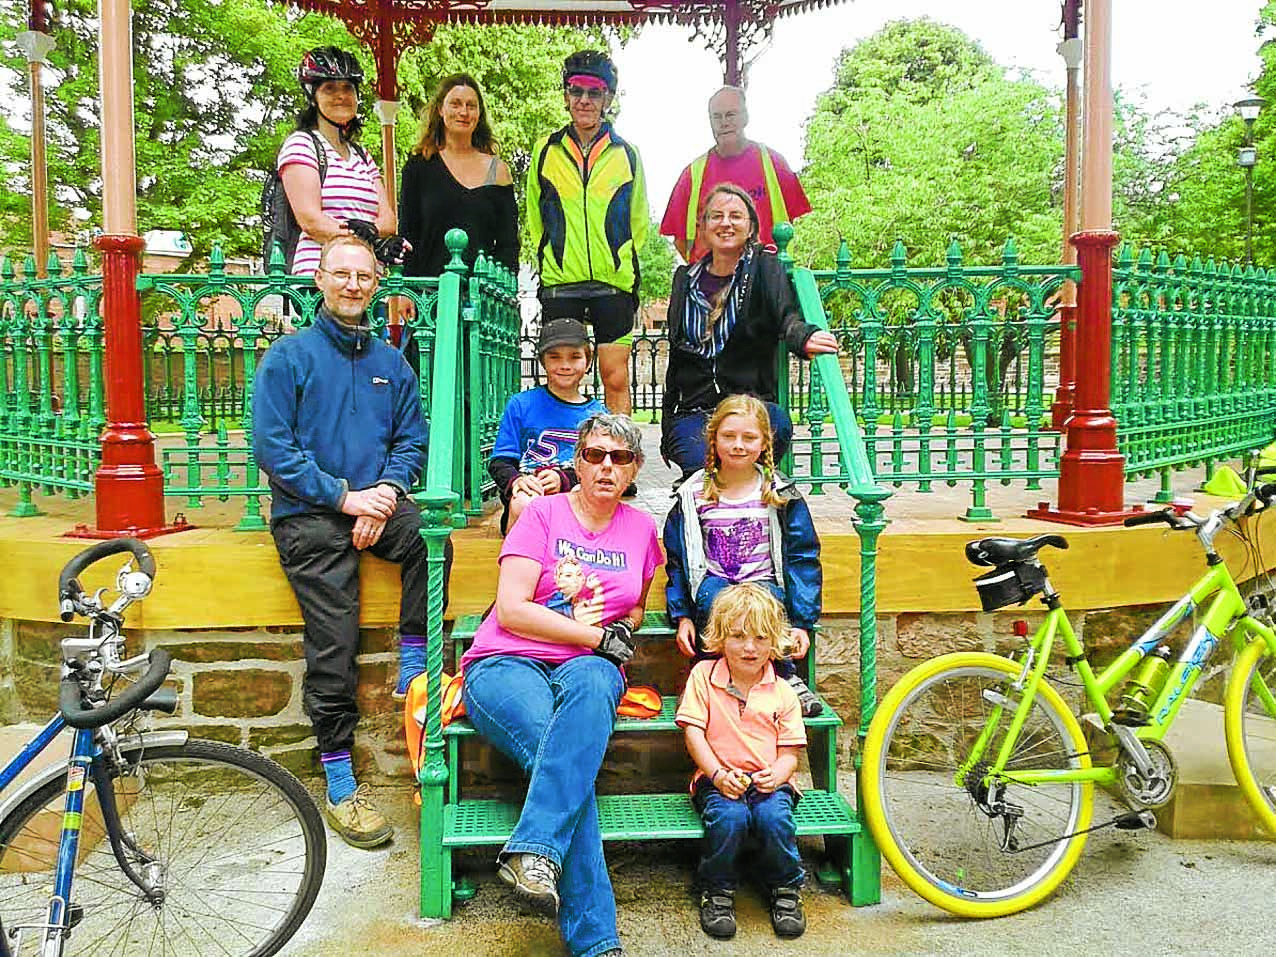 Find out about family cycling safety